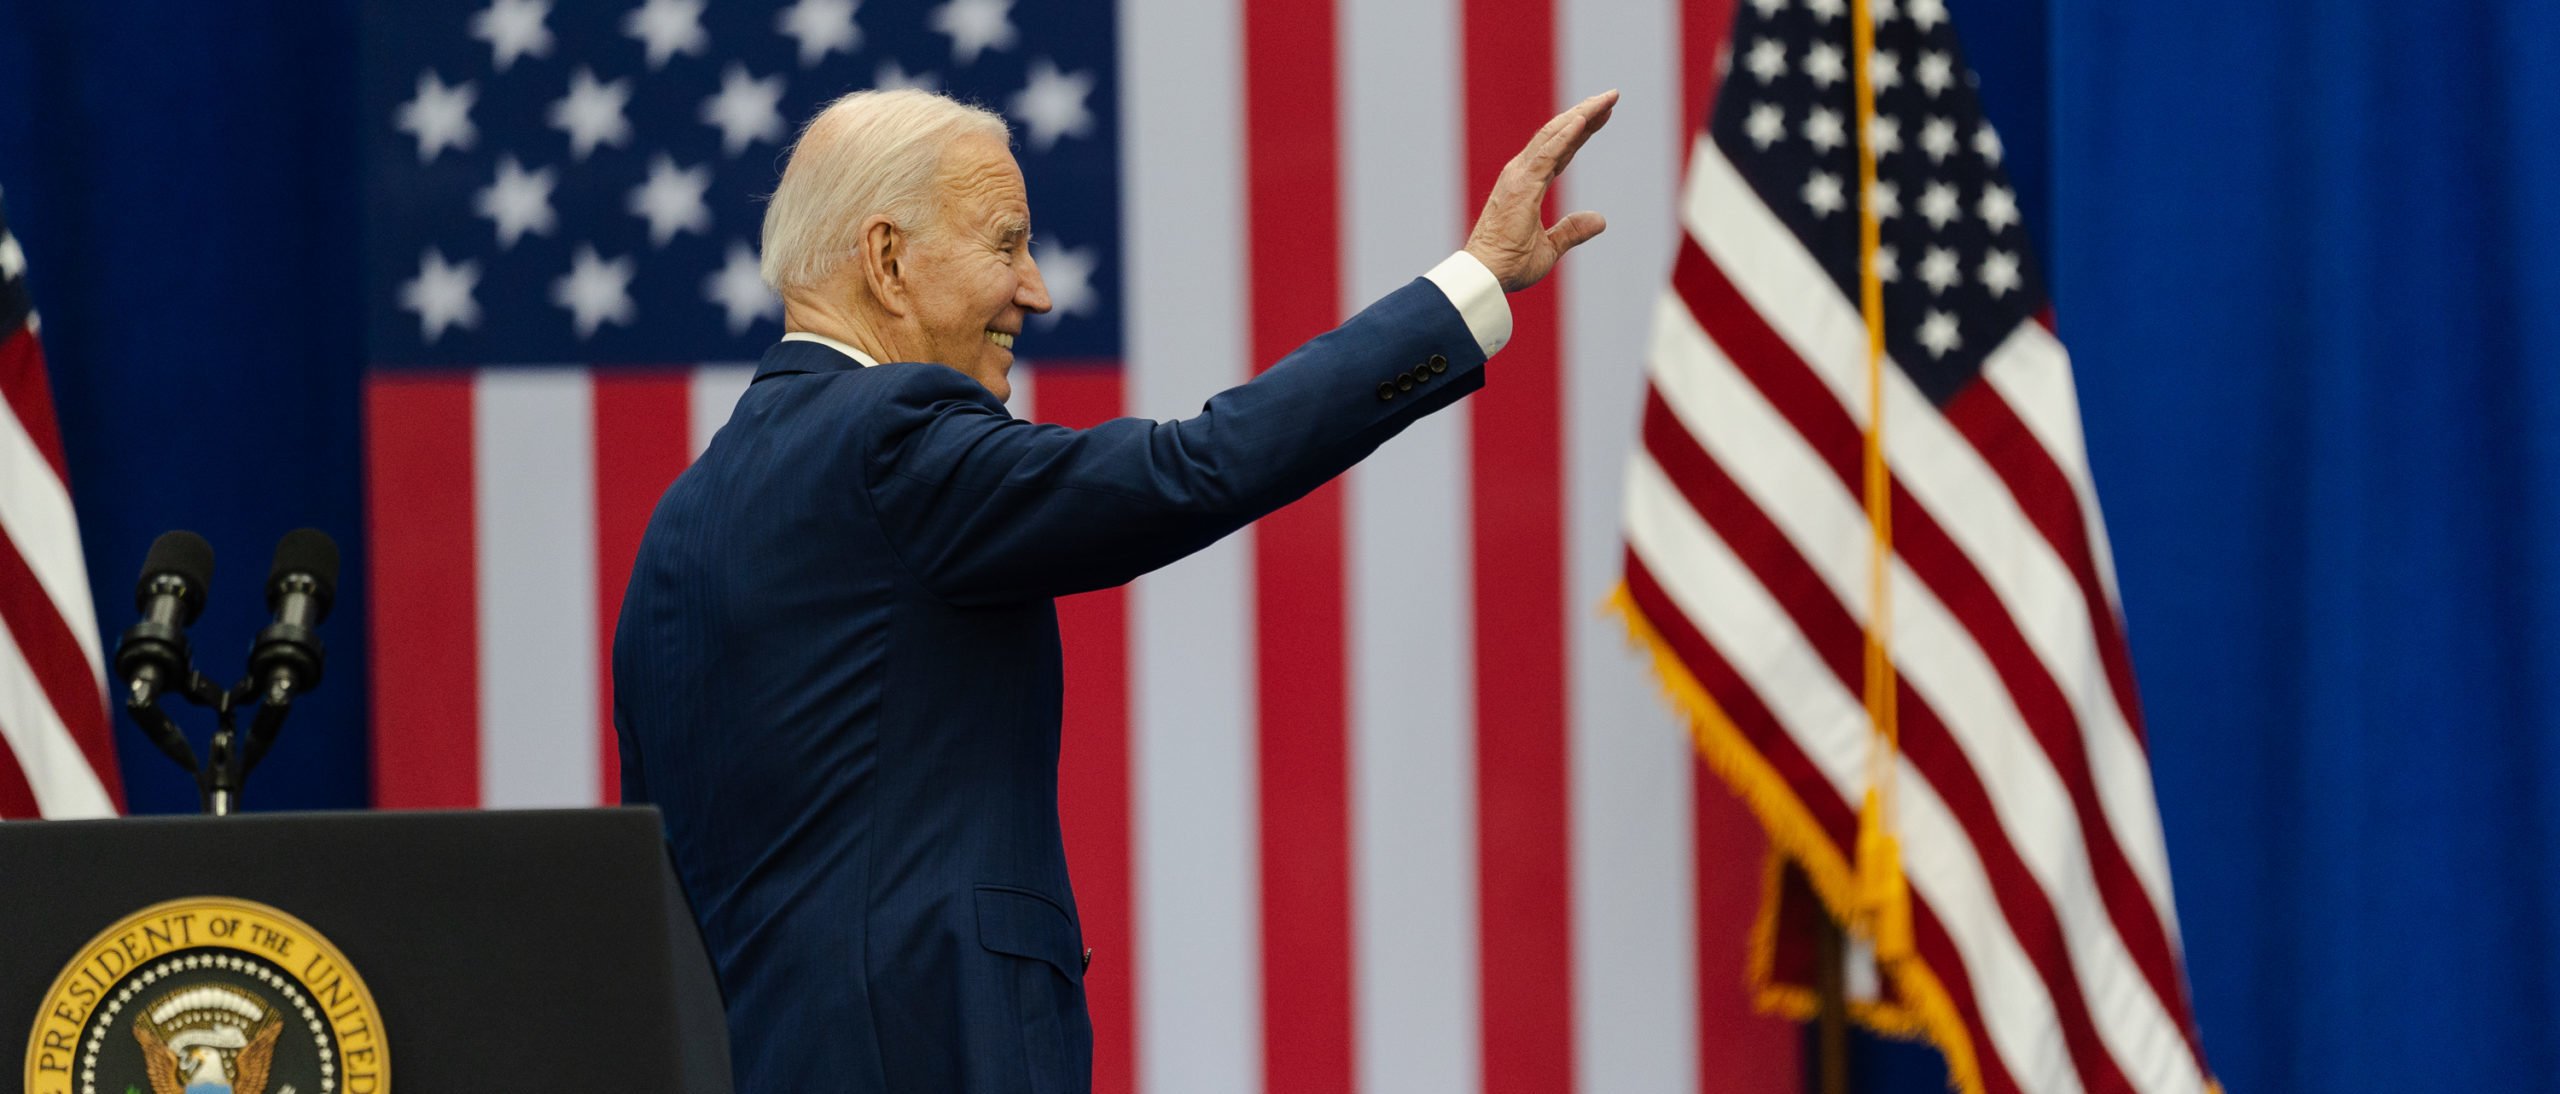 Biden Admin Hands Out $500 Million For Oil Drilling… In The Middle East?